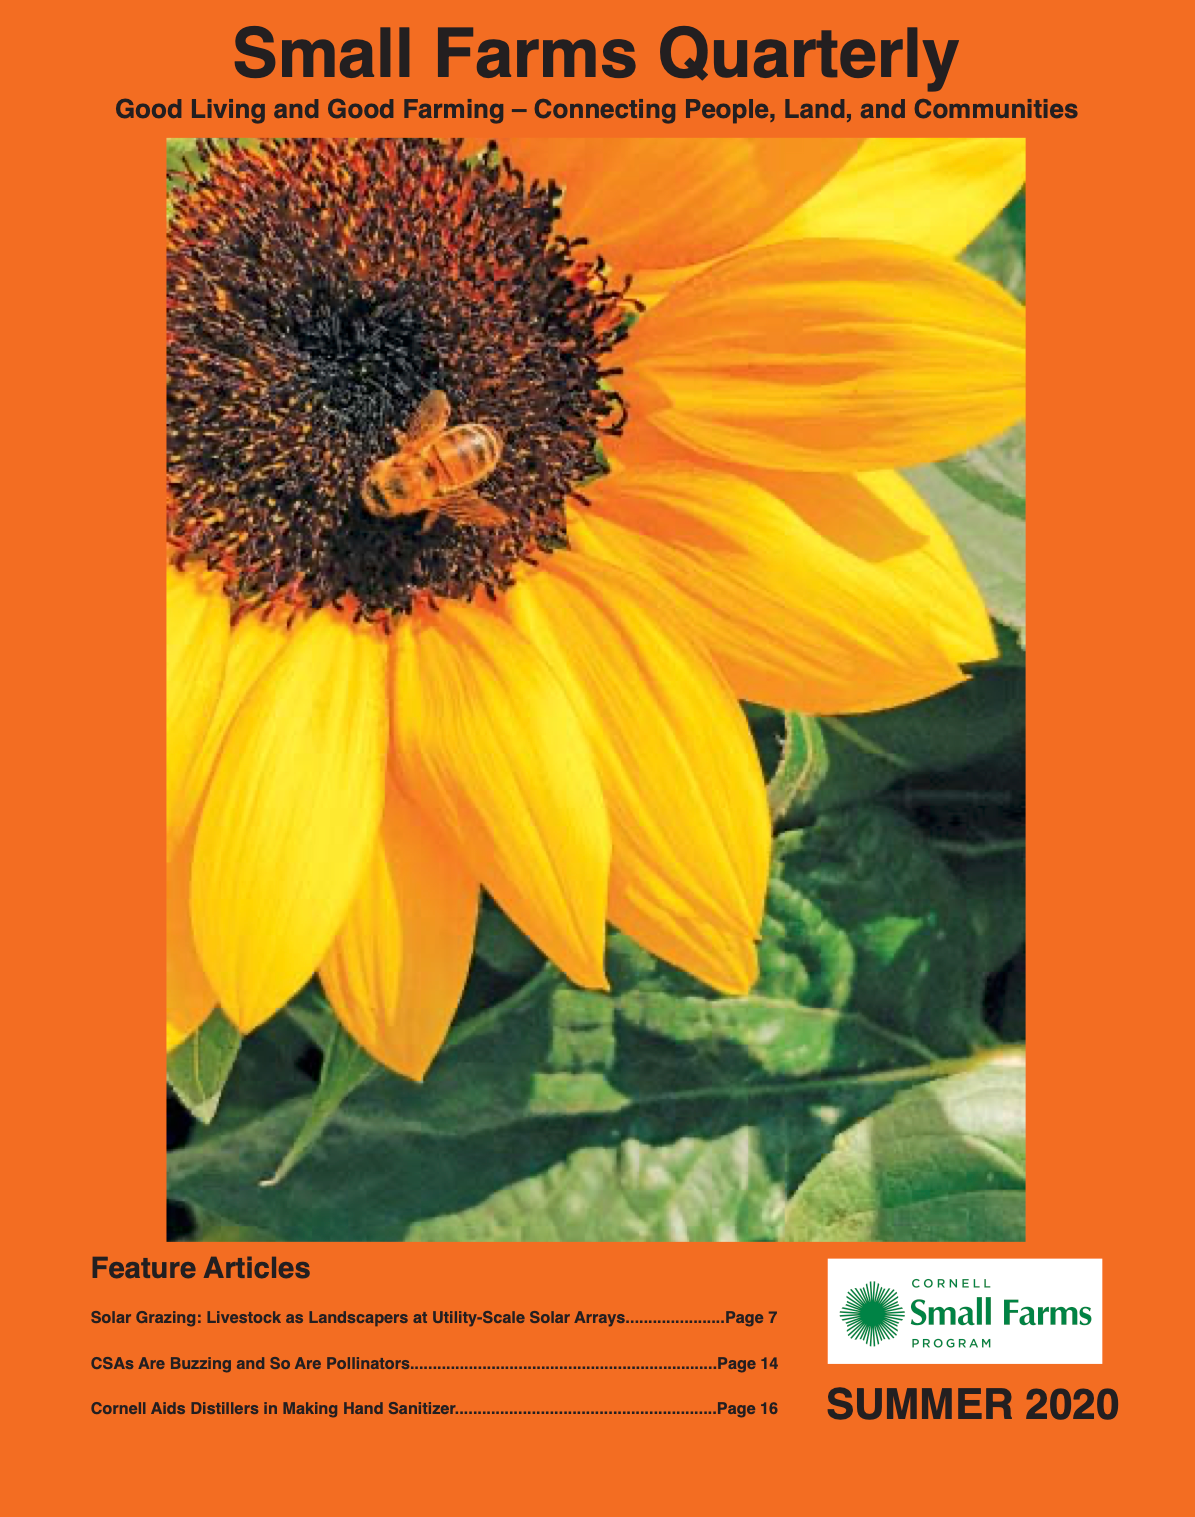 Summer 2020 Quarterly Cover, featuring an image of a flower with a honeybee